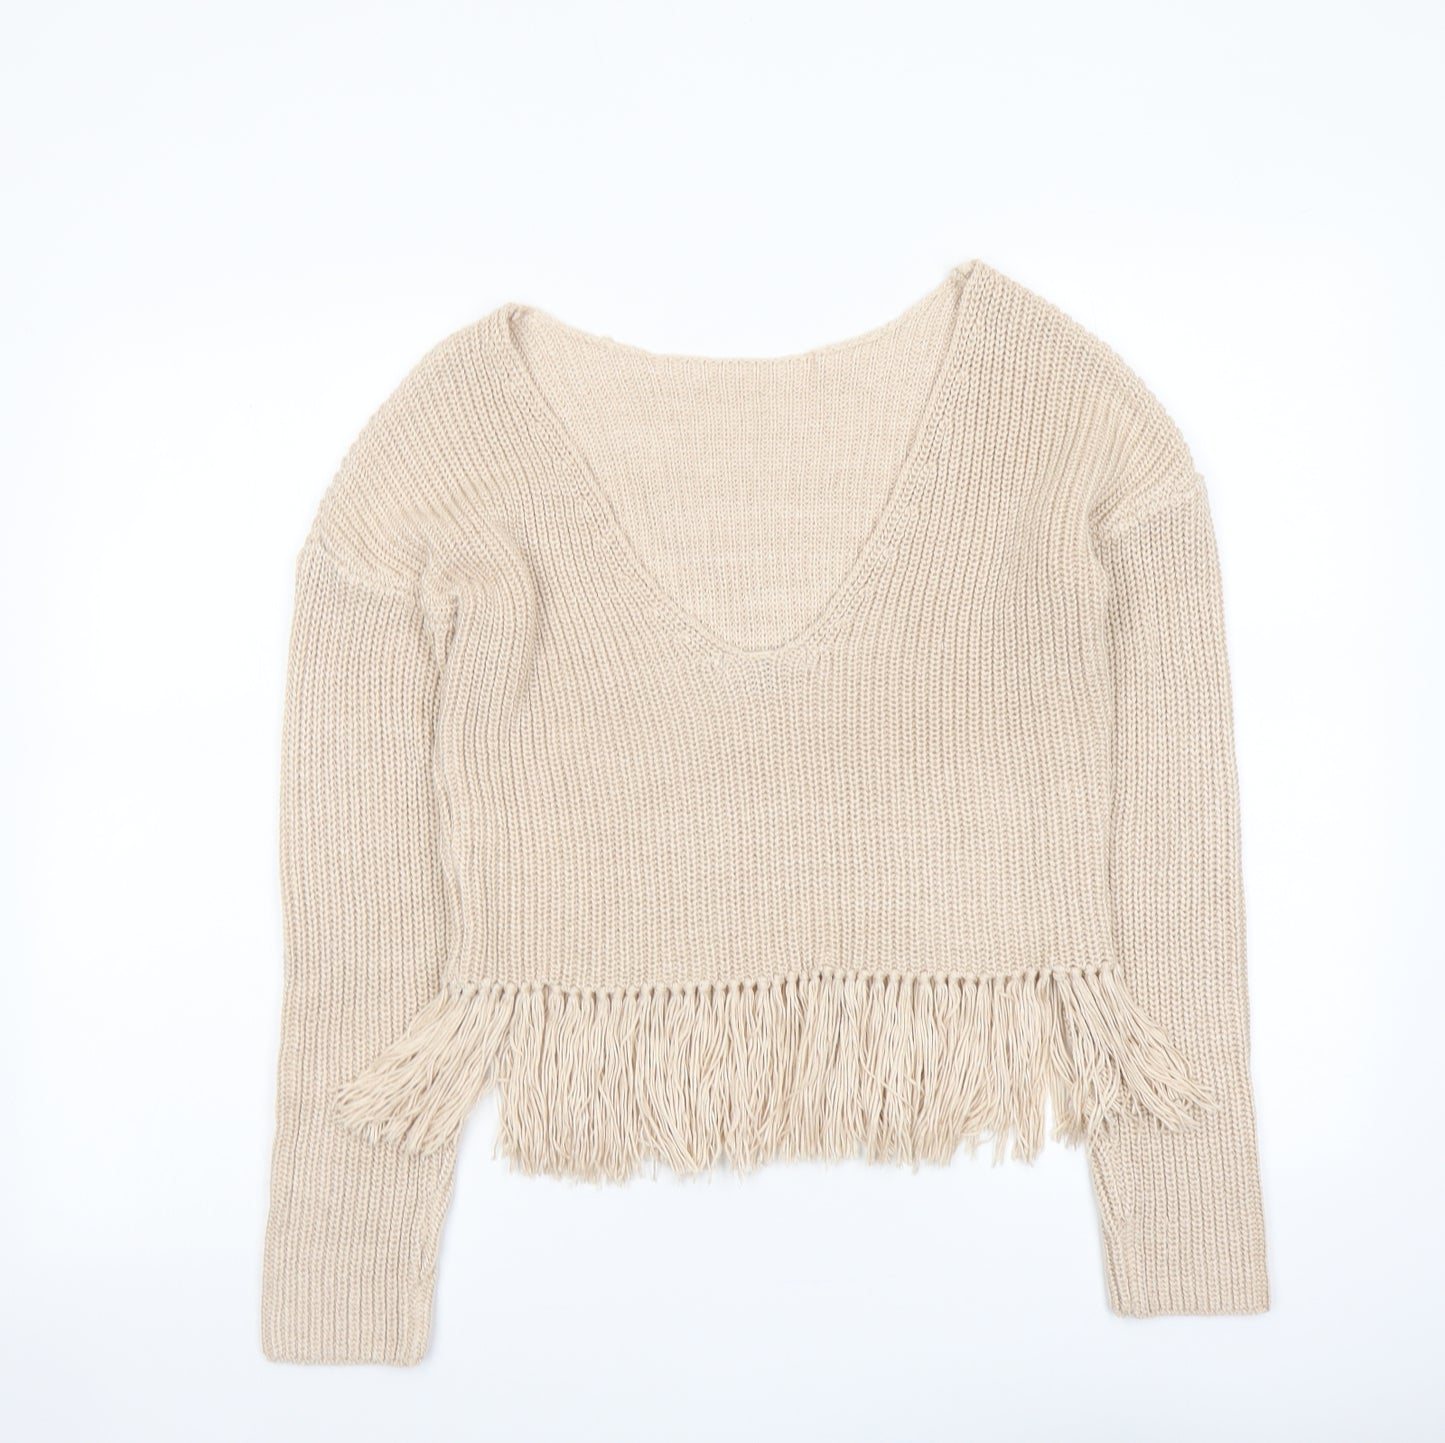 Missguided Womens Beige Boat Neck Acrylic Pullover Jumper Size 6 - Tassels, Low Back